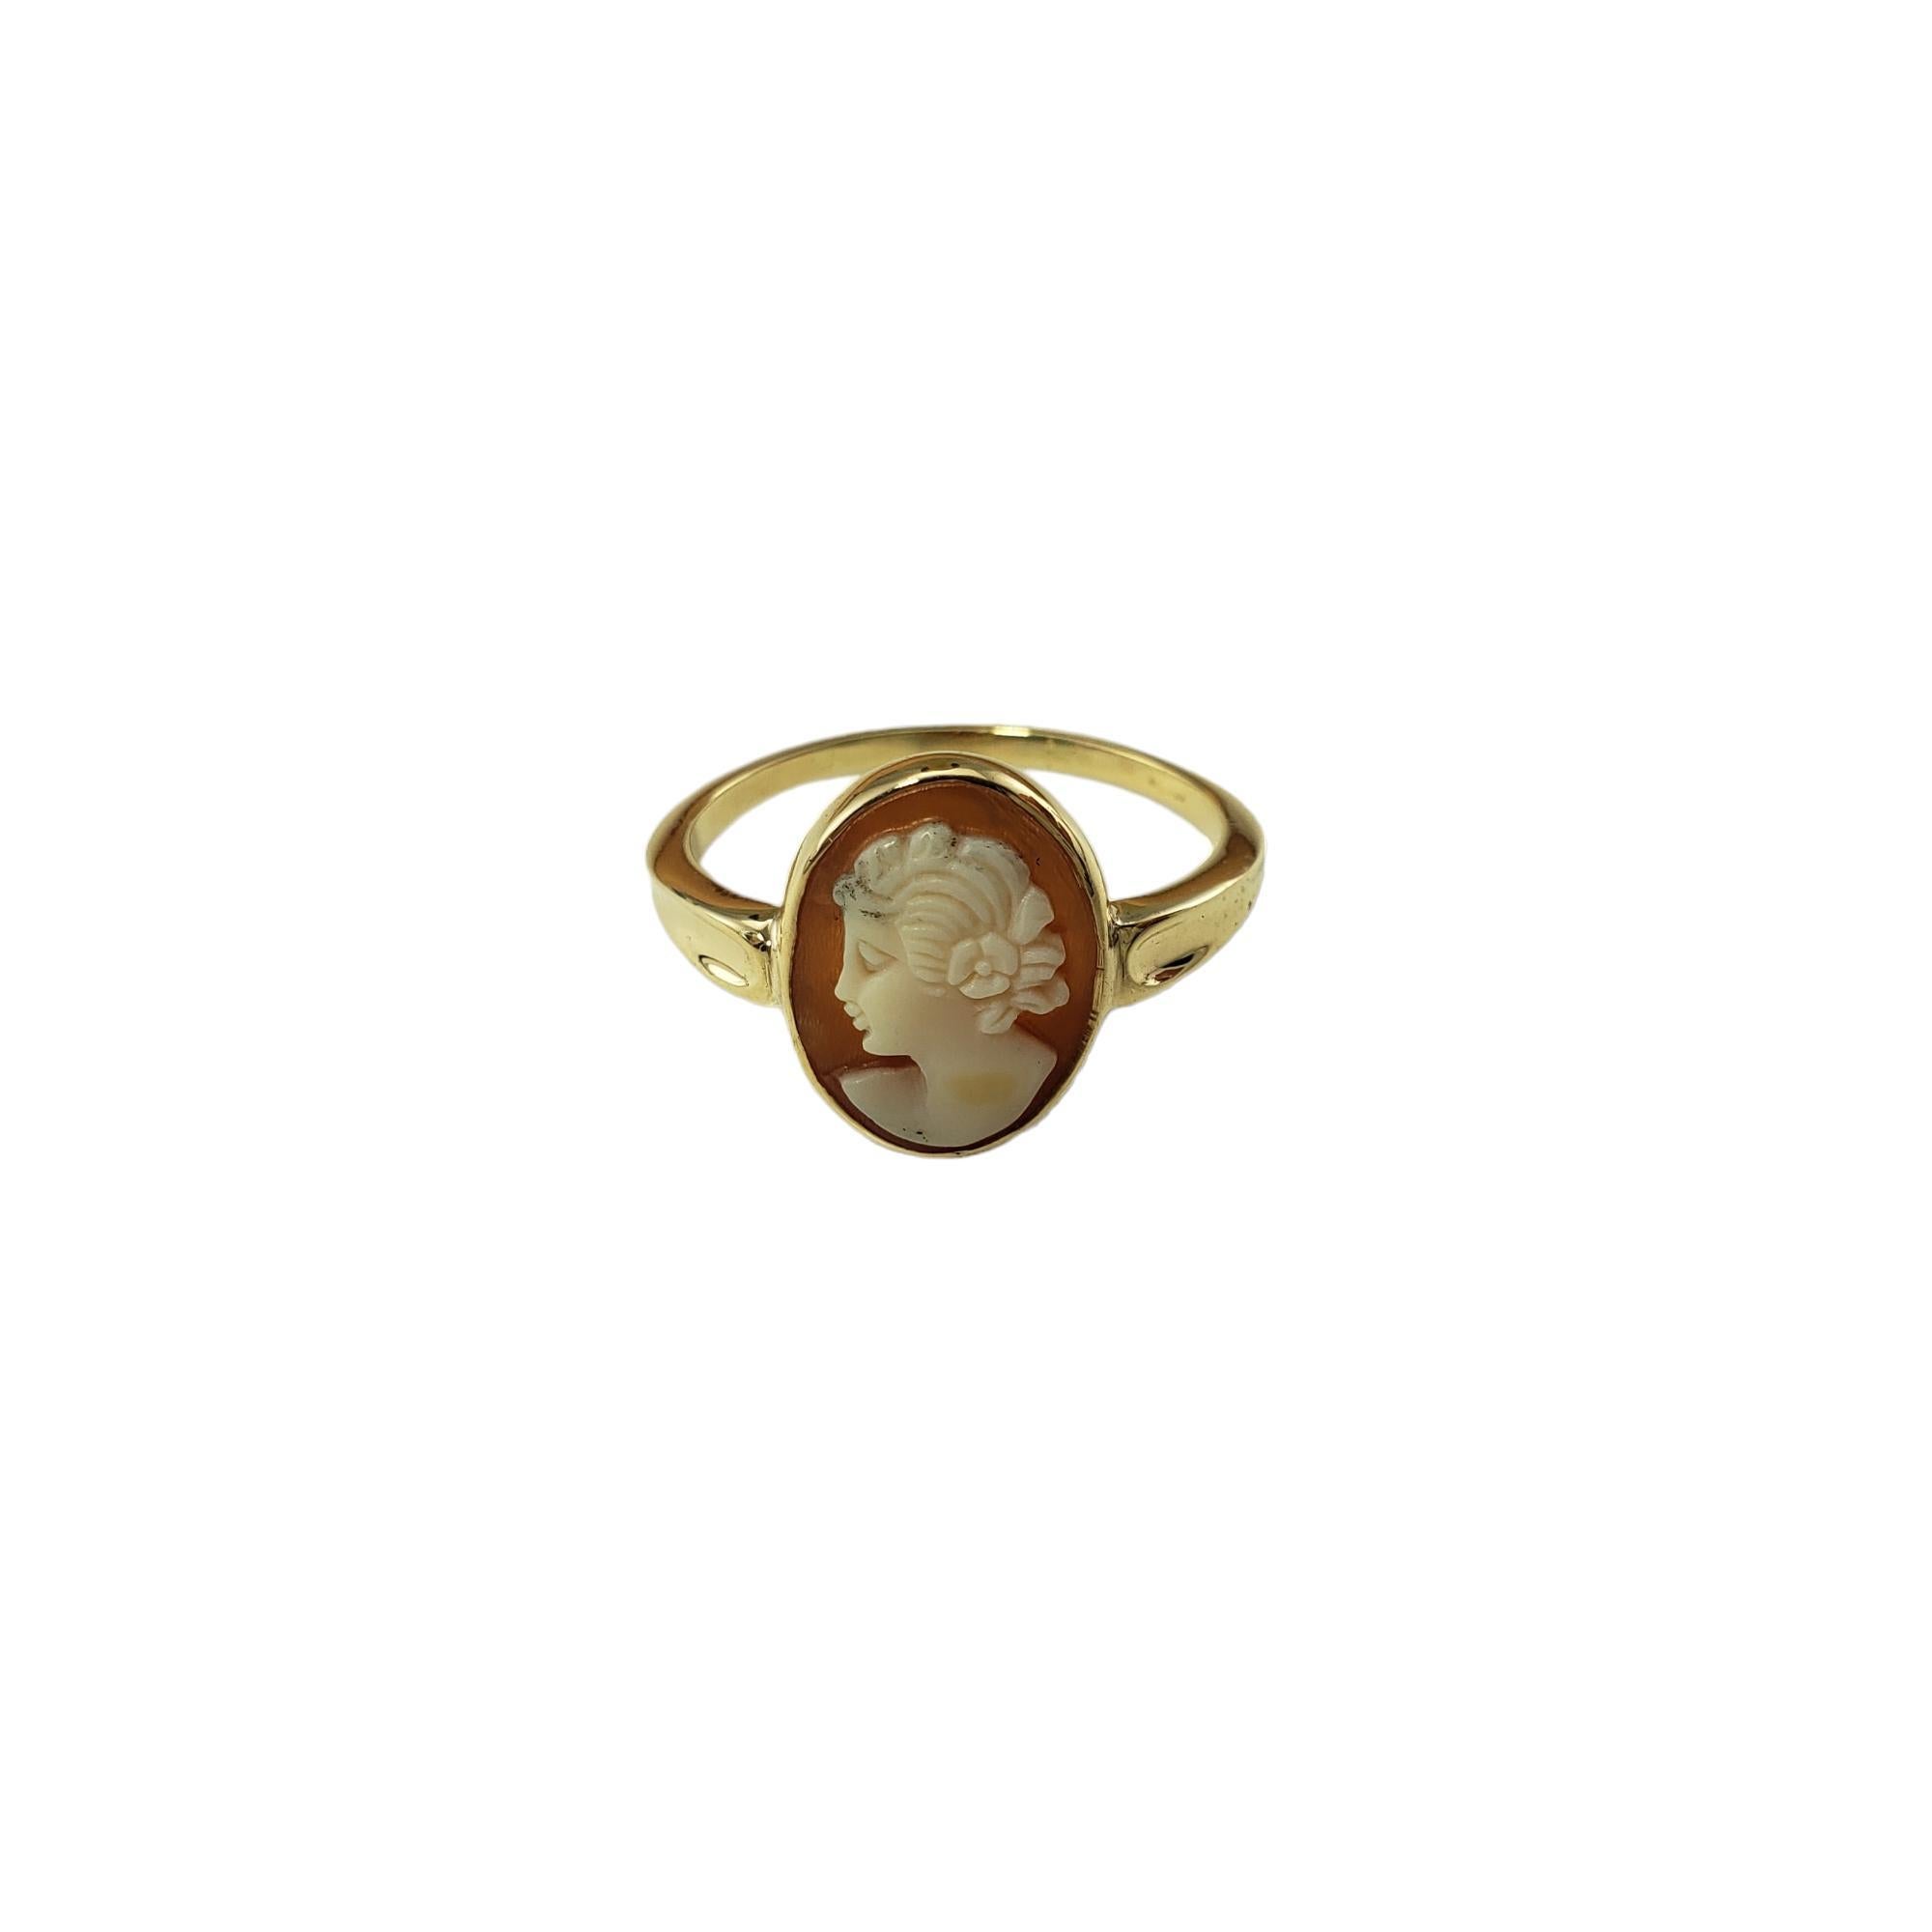 Vintage 10 Karat Yellow Gold Cameo Ring Size 8.5-

This elegant cameo ring features a lovely lady in profile set in classic 10K yellow gold.  Width:  14.8 mm.  Shank: 1.6 mm.

Ring Size: 8.5

Tested 10K gold.

Weight: 2.9 gr./ 1.8 dwt.

Very good